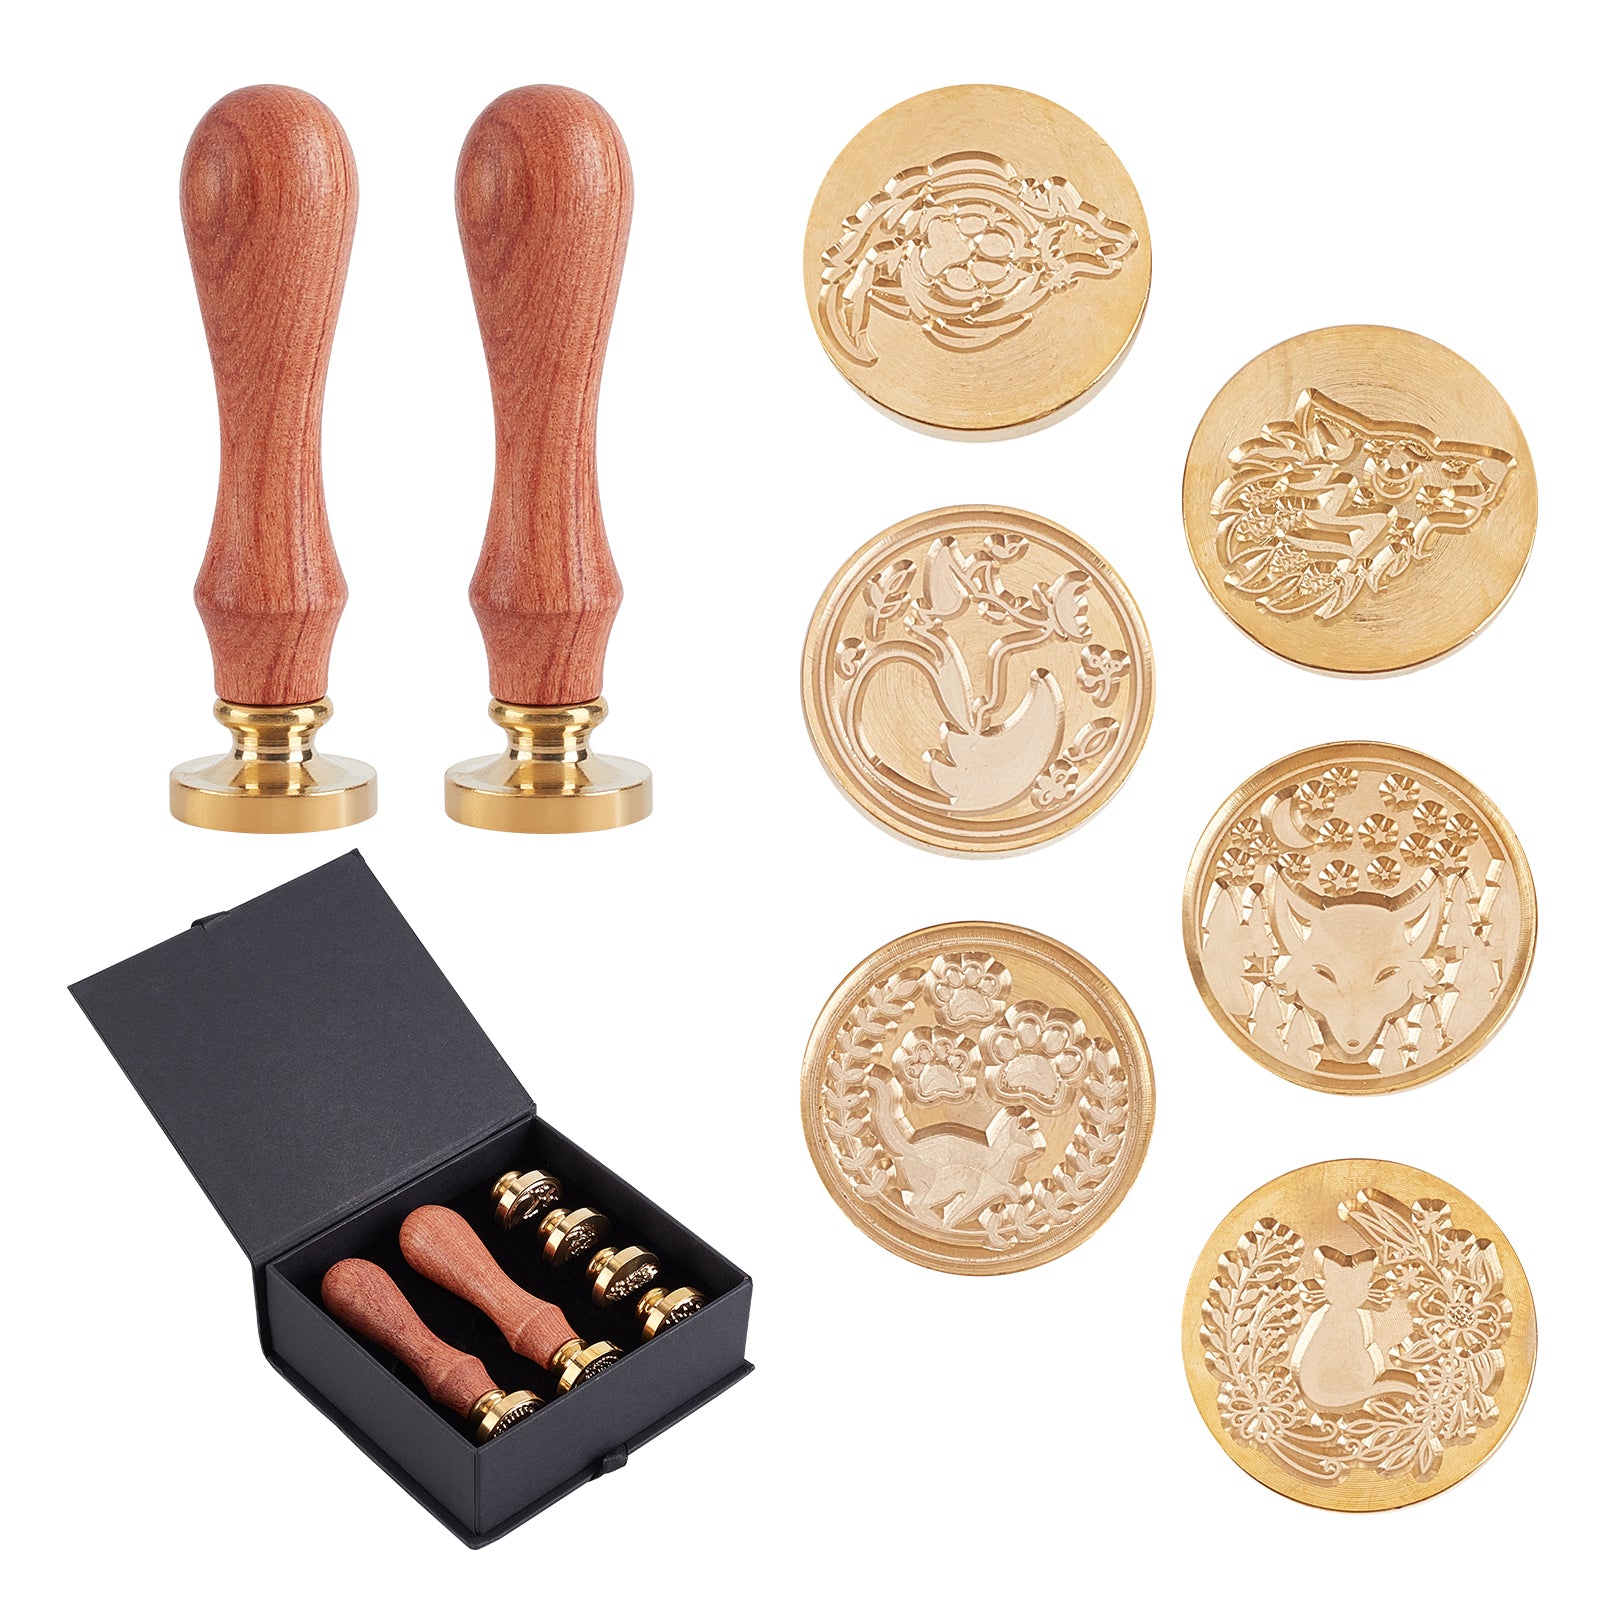 Bright Creations 7 Piece Box Set Letter Sealing Wax Seal Stamp